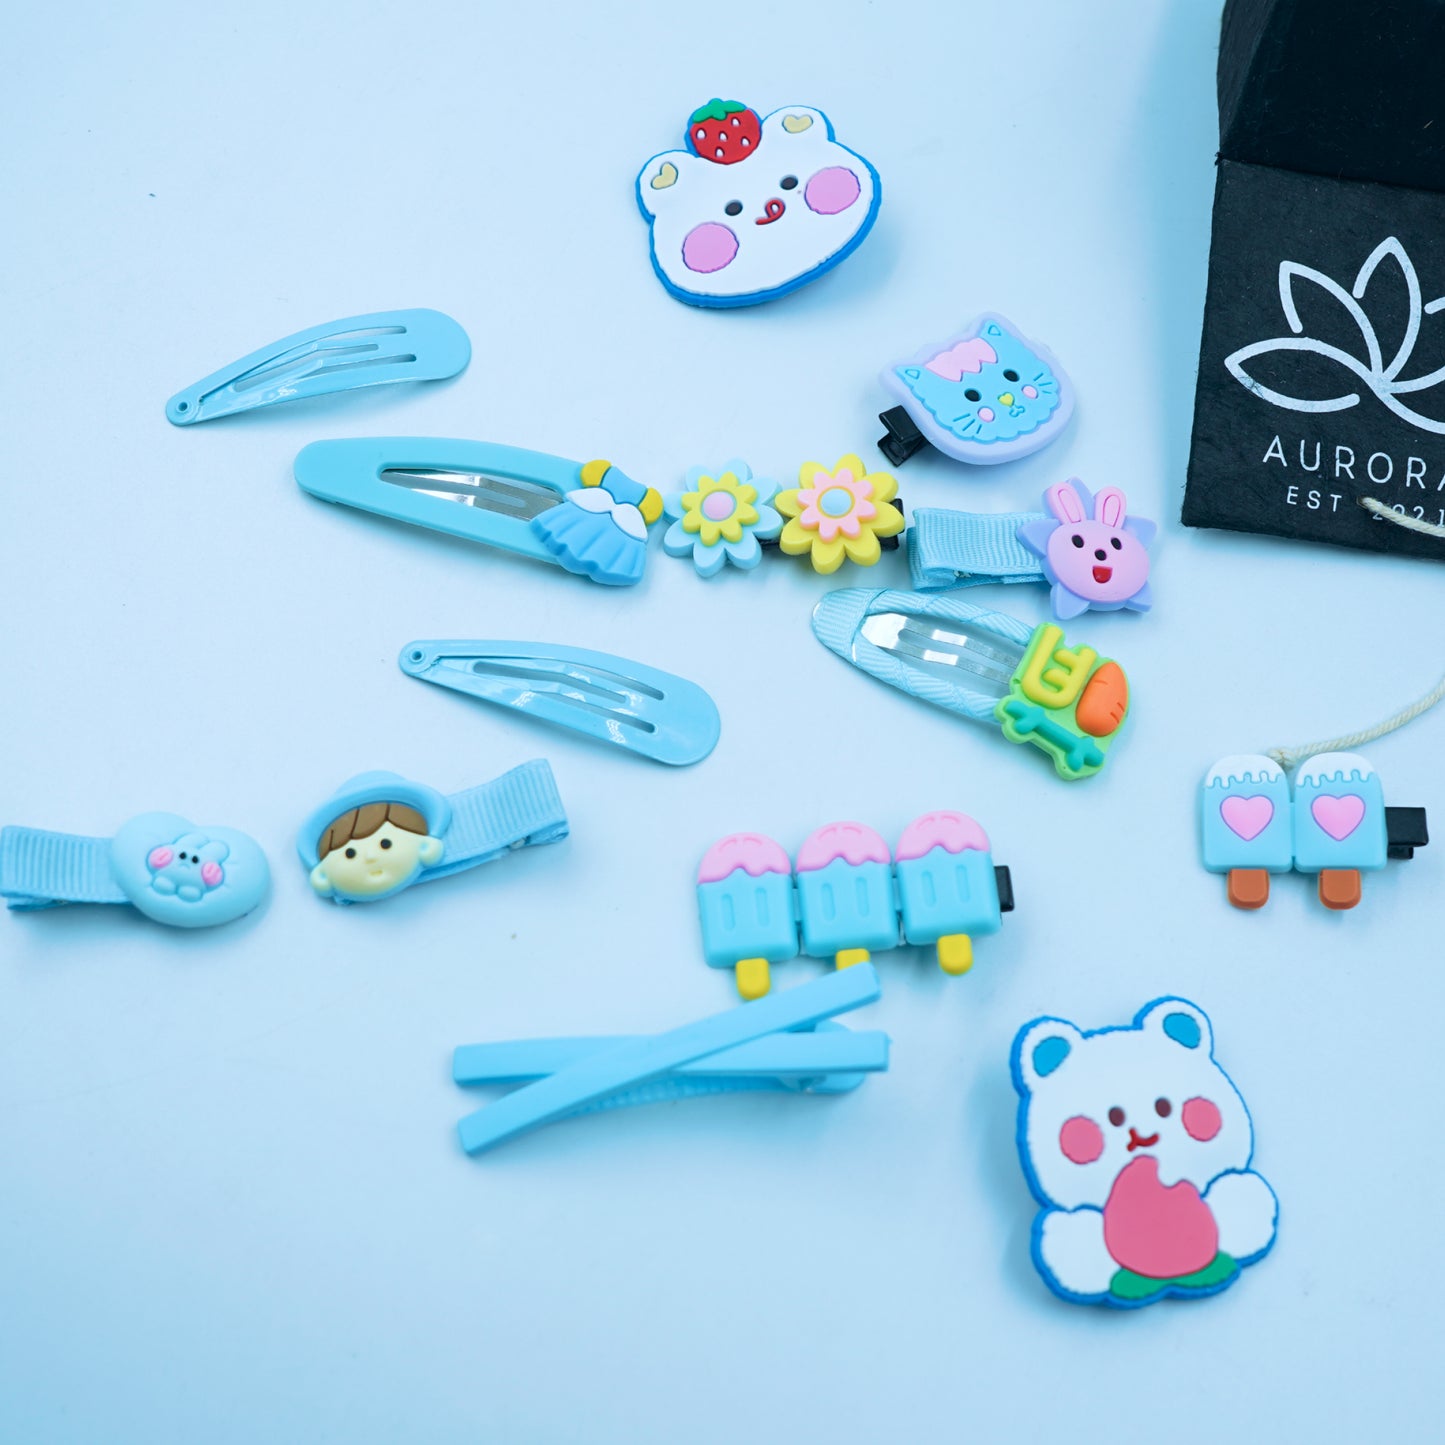 Buy Aurora Blue Hair Clips Collection | Cute Design | 14 pcs in 1 packet | B44